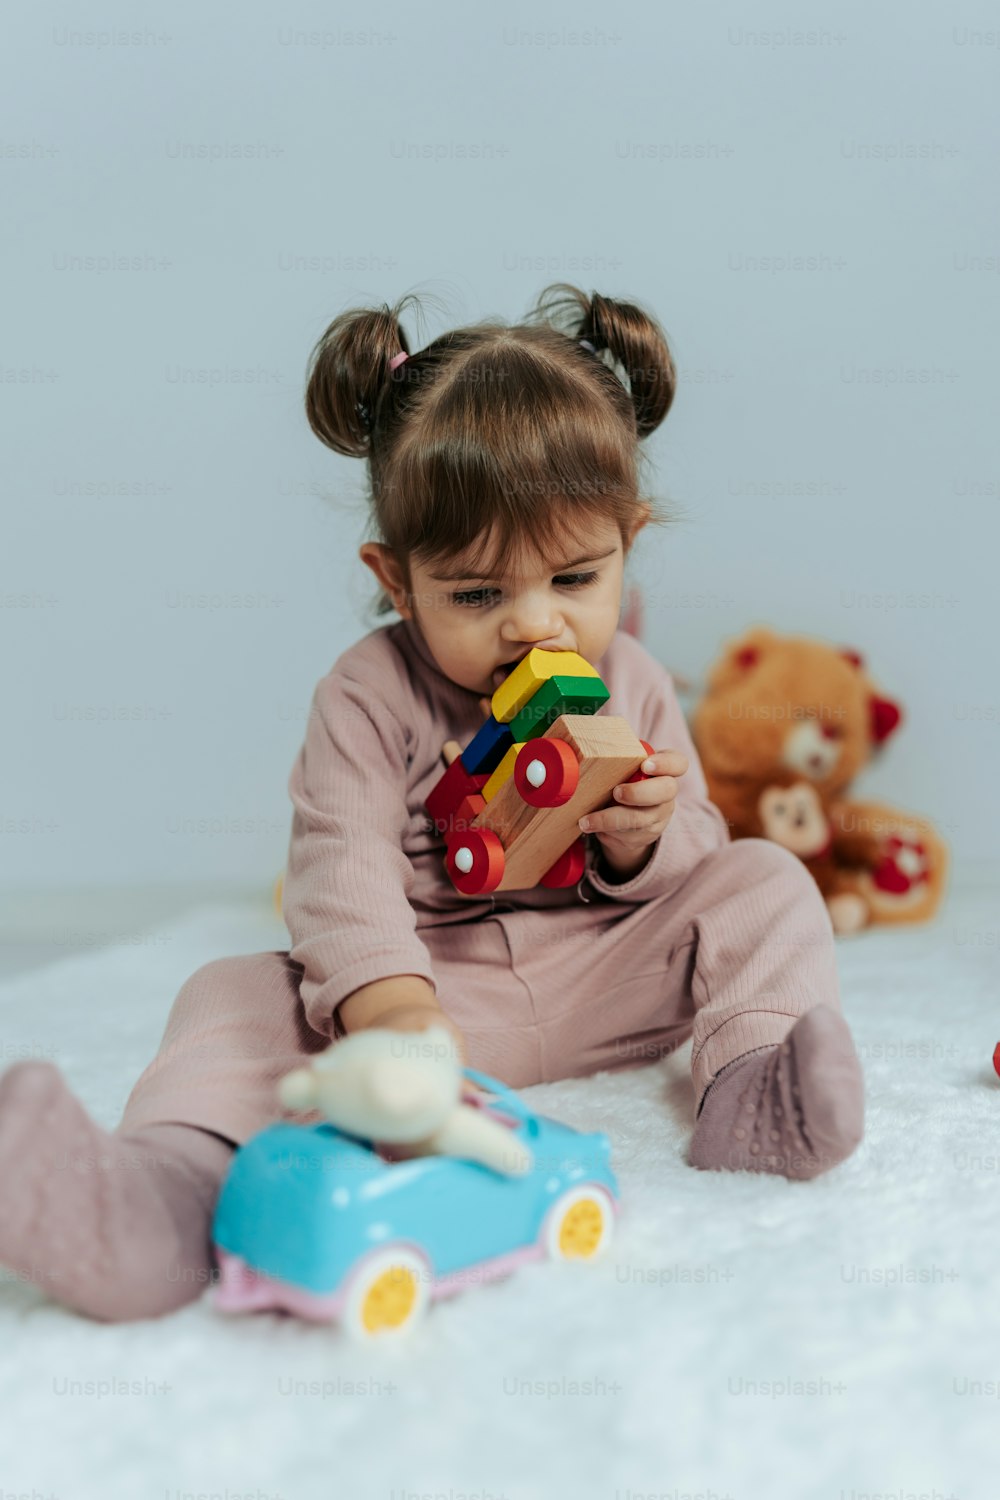 a little girl sitting on a bed playing with a toy